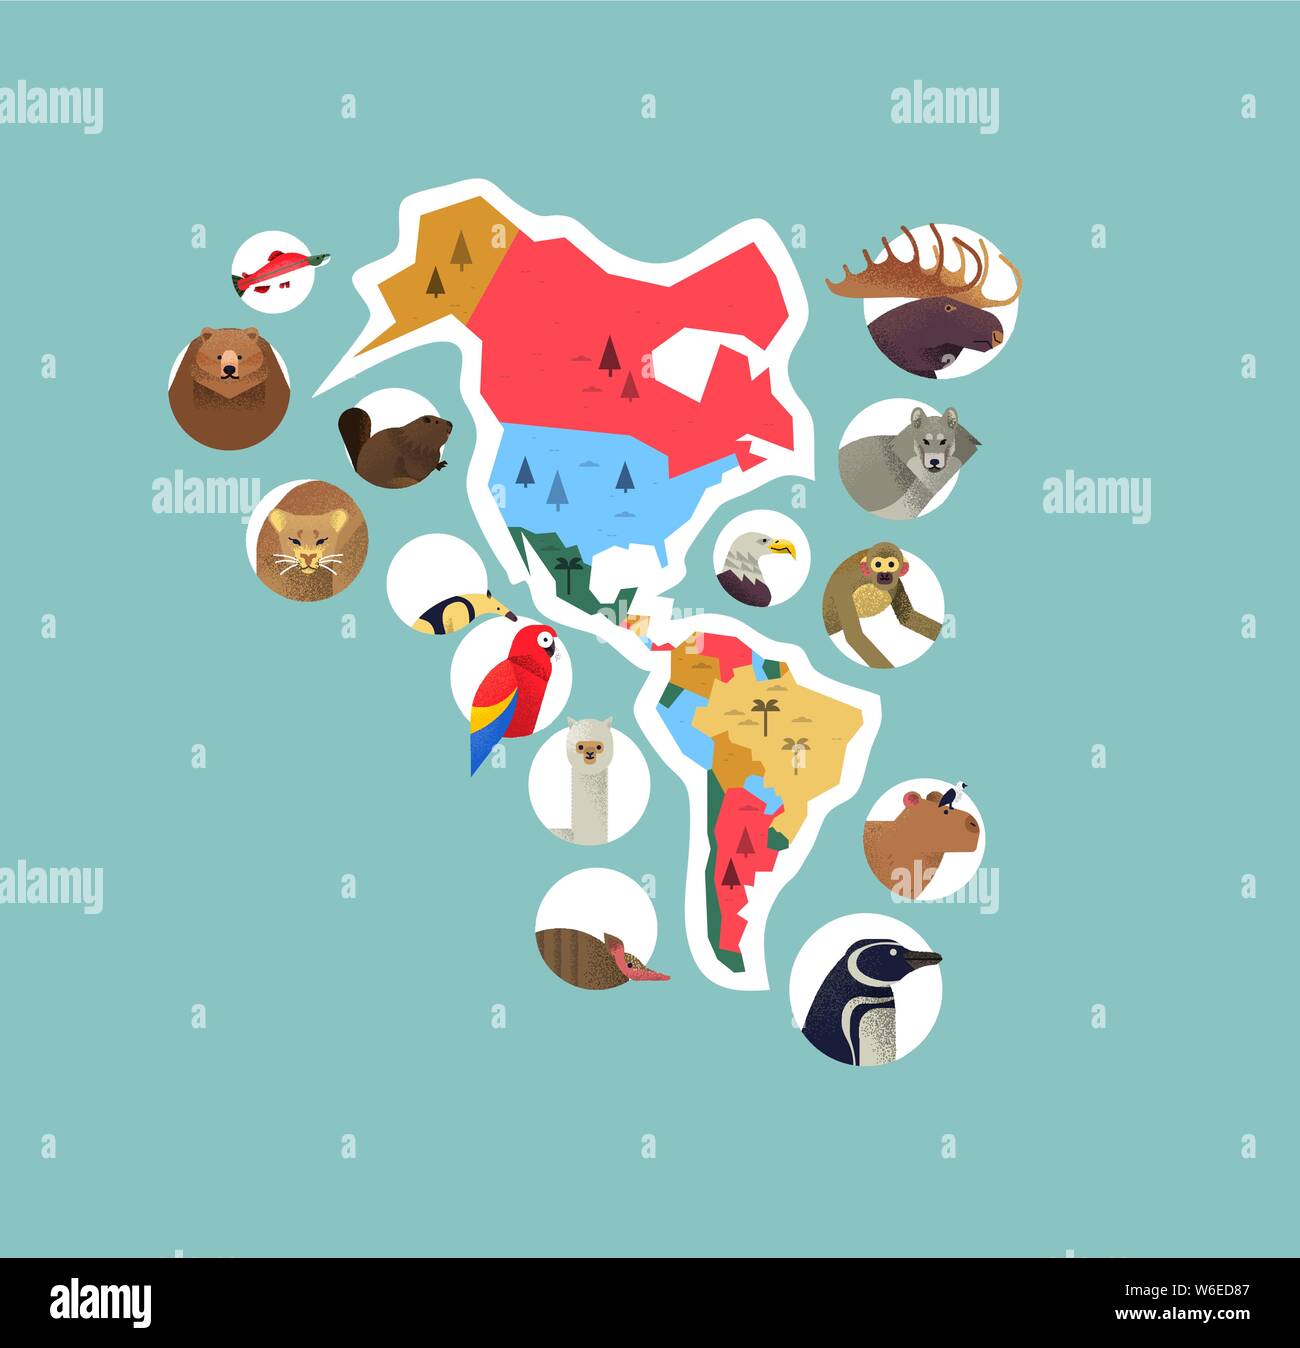 The Americas continent map with wild animals from south and north america. Diverse wildlife icons includes bear, monkey, bird, wolf, exotic fauna. Stock Vector